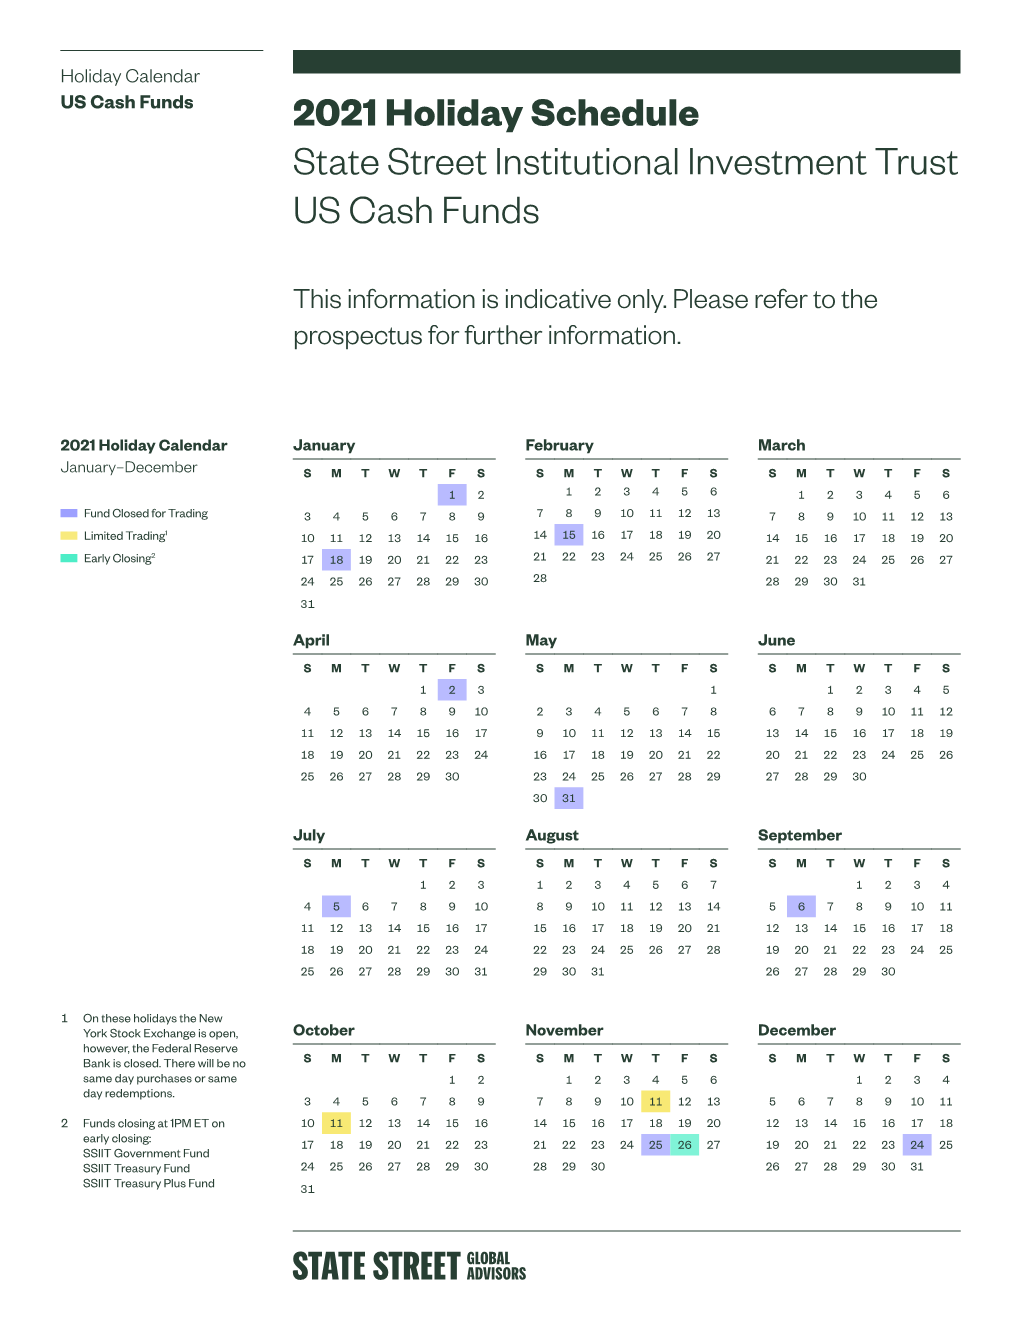 2021 Holiday Schedule State Street Institutional Investment Trust US Cash Funds